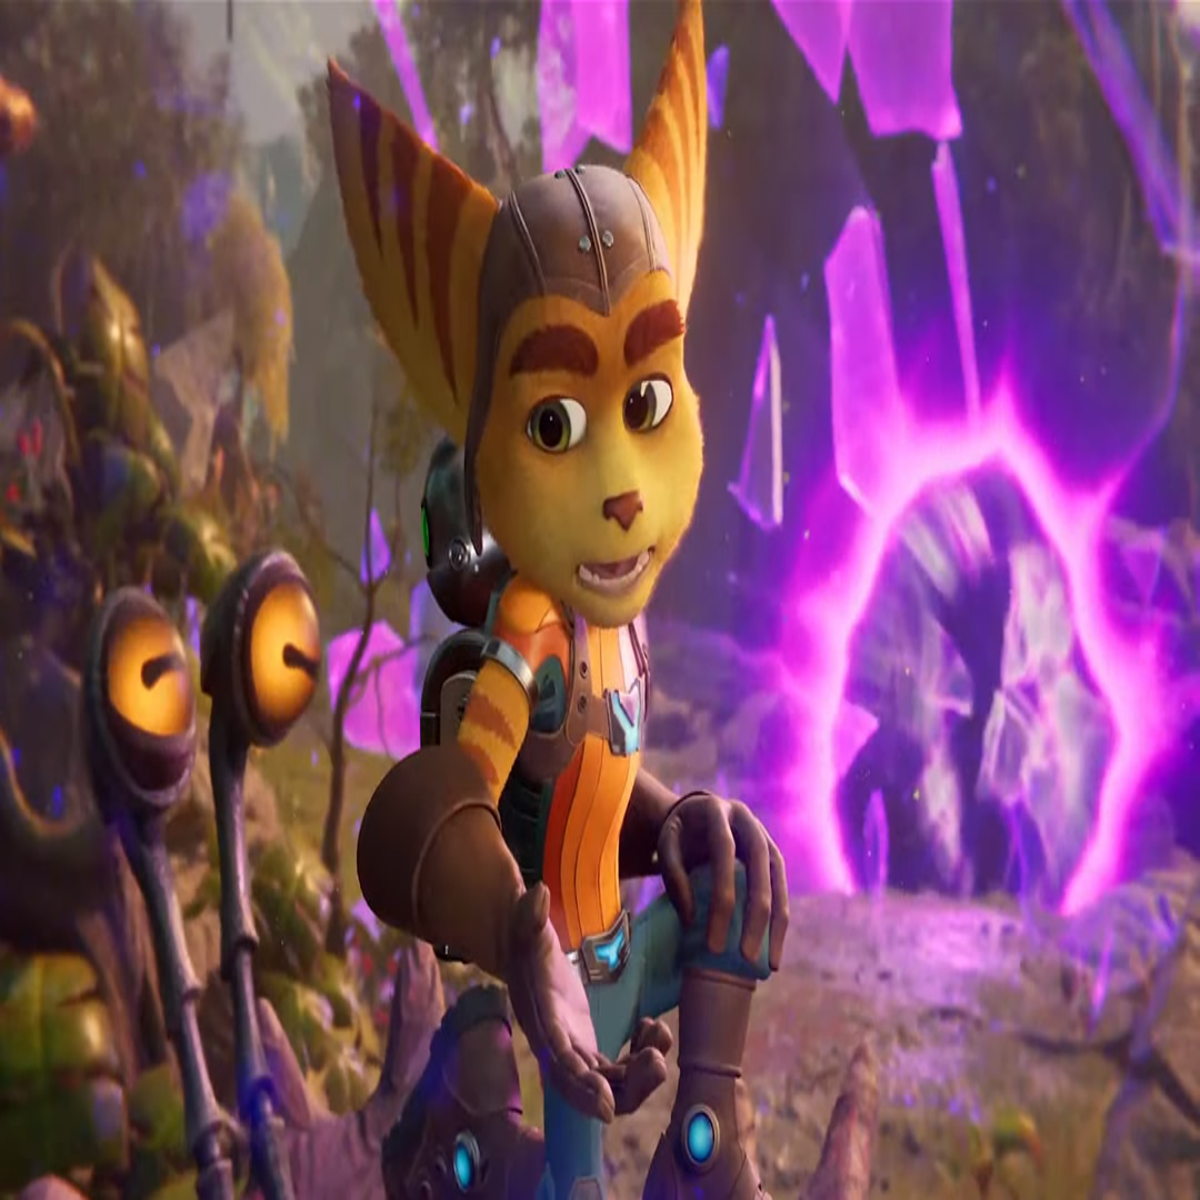 Ratchet & Clank: Rift Apart – Planets and Exploration